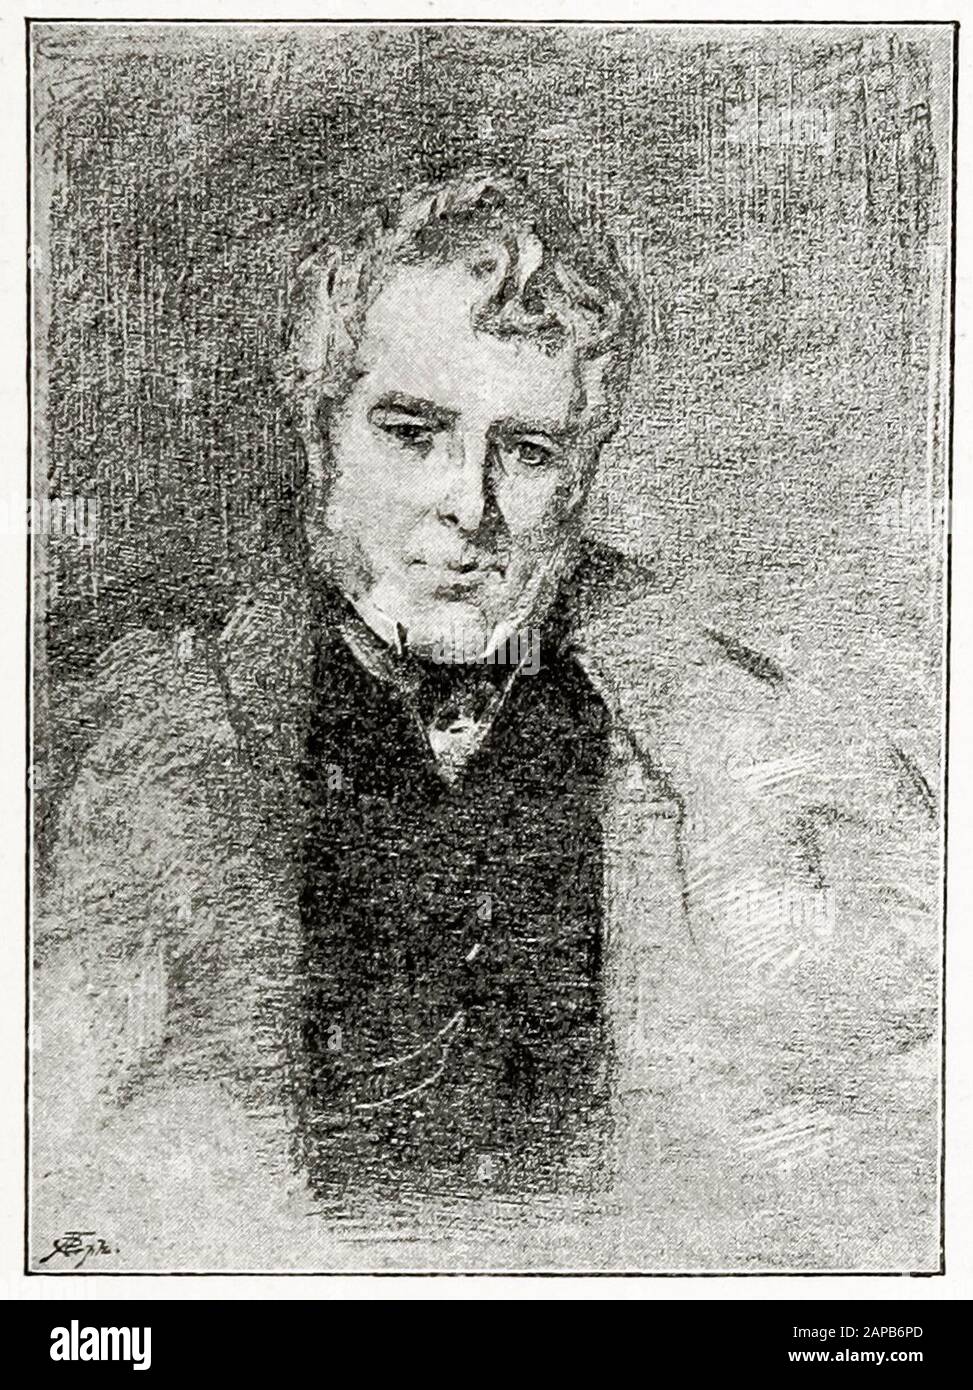 Lord Melbourne, William Lamb, 2nd Viscount Melbourne (1779-1848), portrait drawing, 1889-1890 Stock Photo